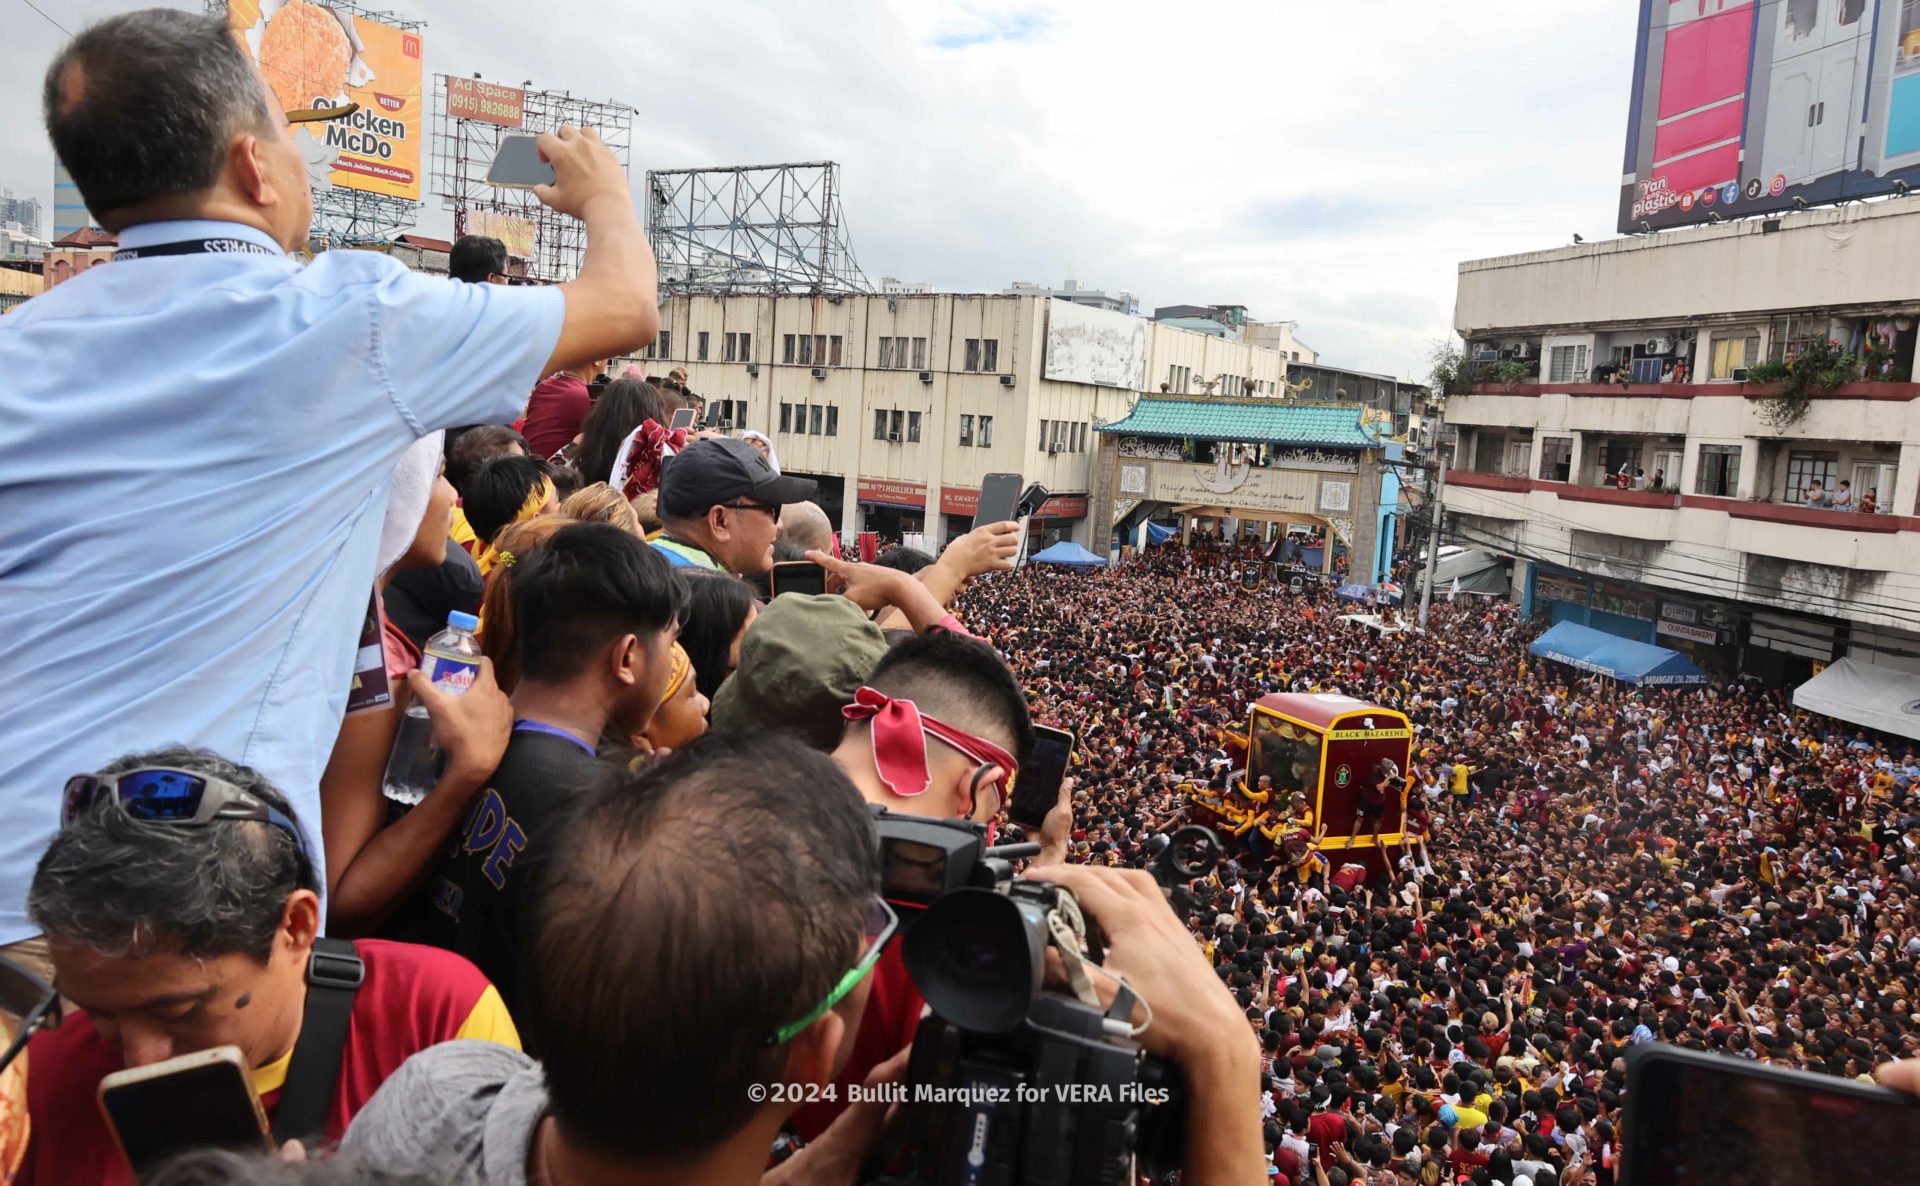 Traslacion 2024: A spectacular display Filipinos’ faith and piety By Bullit Marquez 12/15